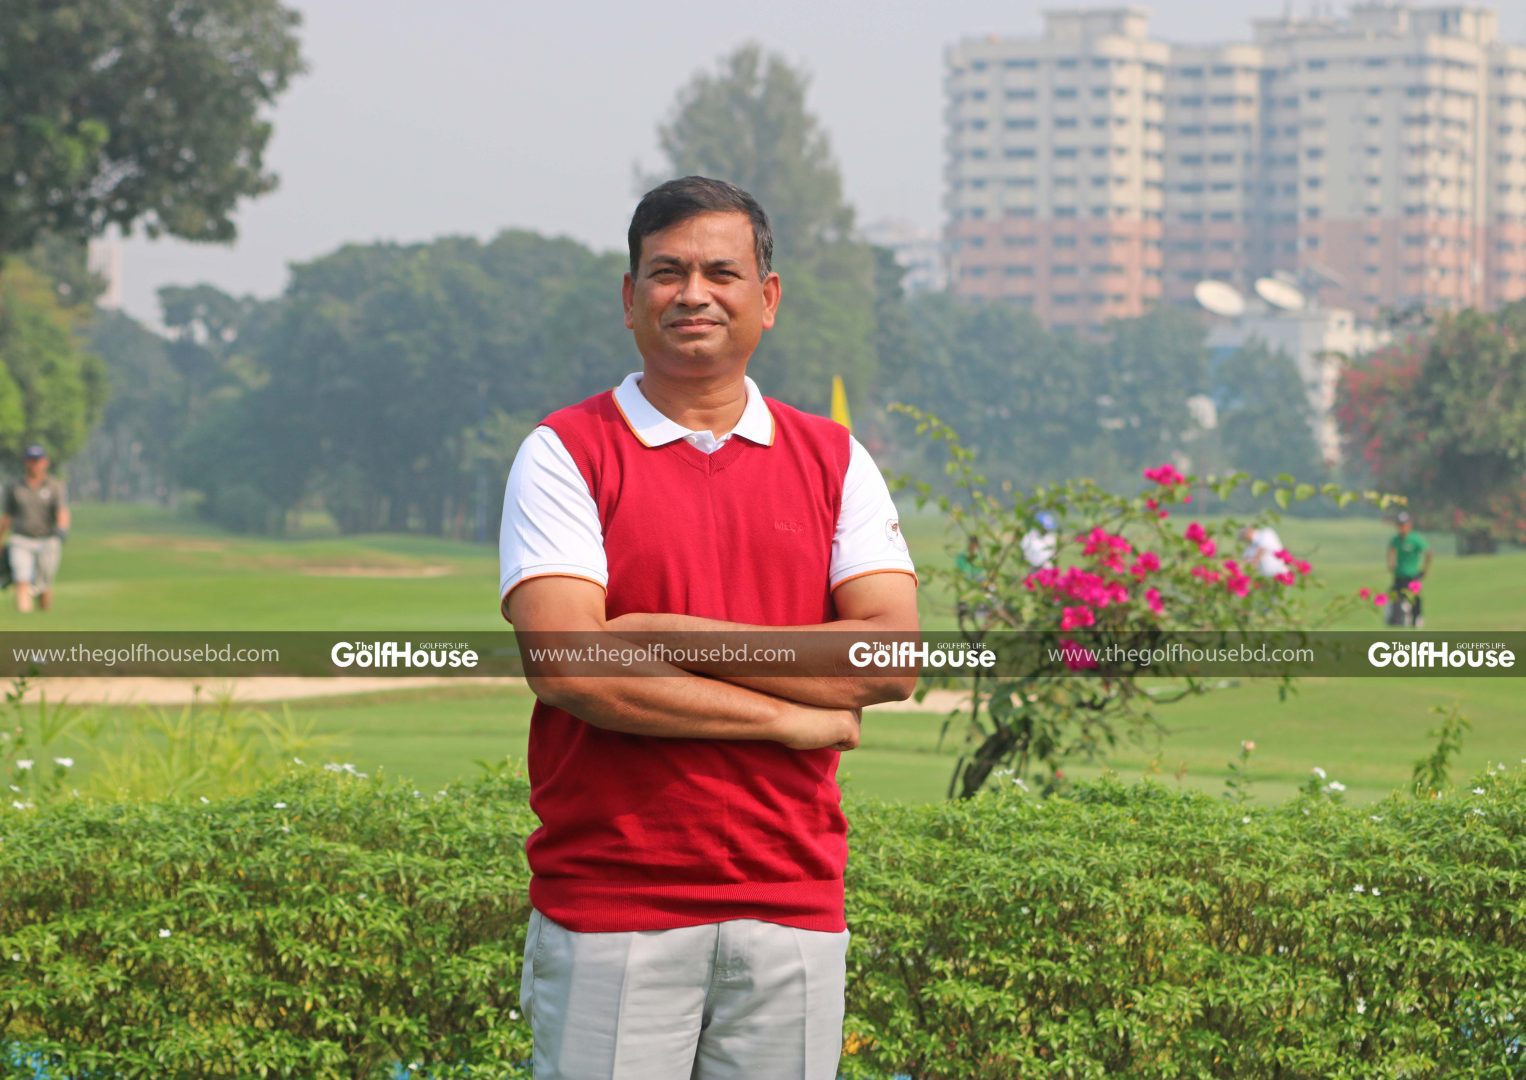 The veteran organizer is determined to take the momentum in golf further by strengthening the junior golfing department and spreading the game to outside of Dhaka. Here he speaks about his plans for this term and the upcoming events at the Kurmitola Golf Club.